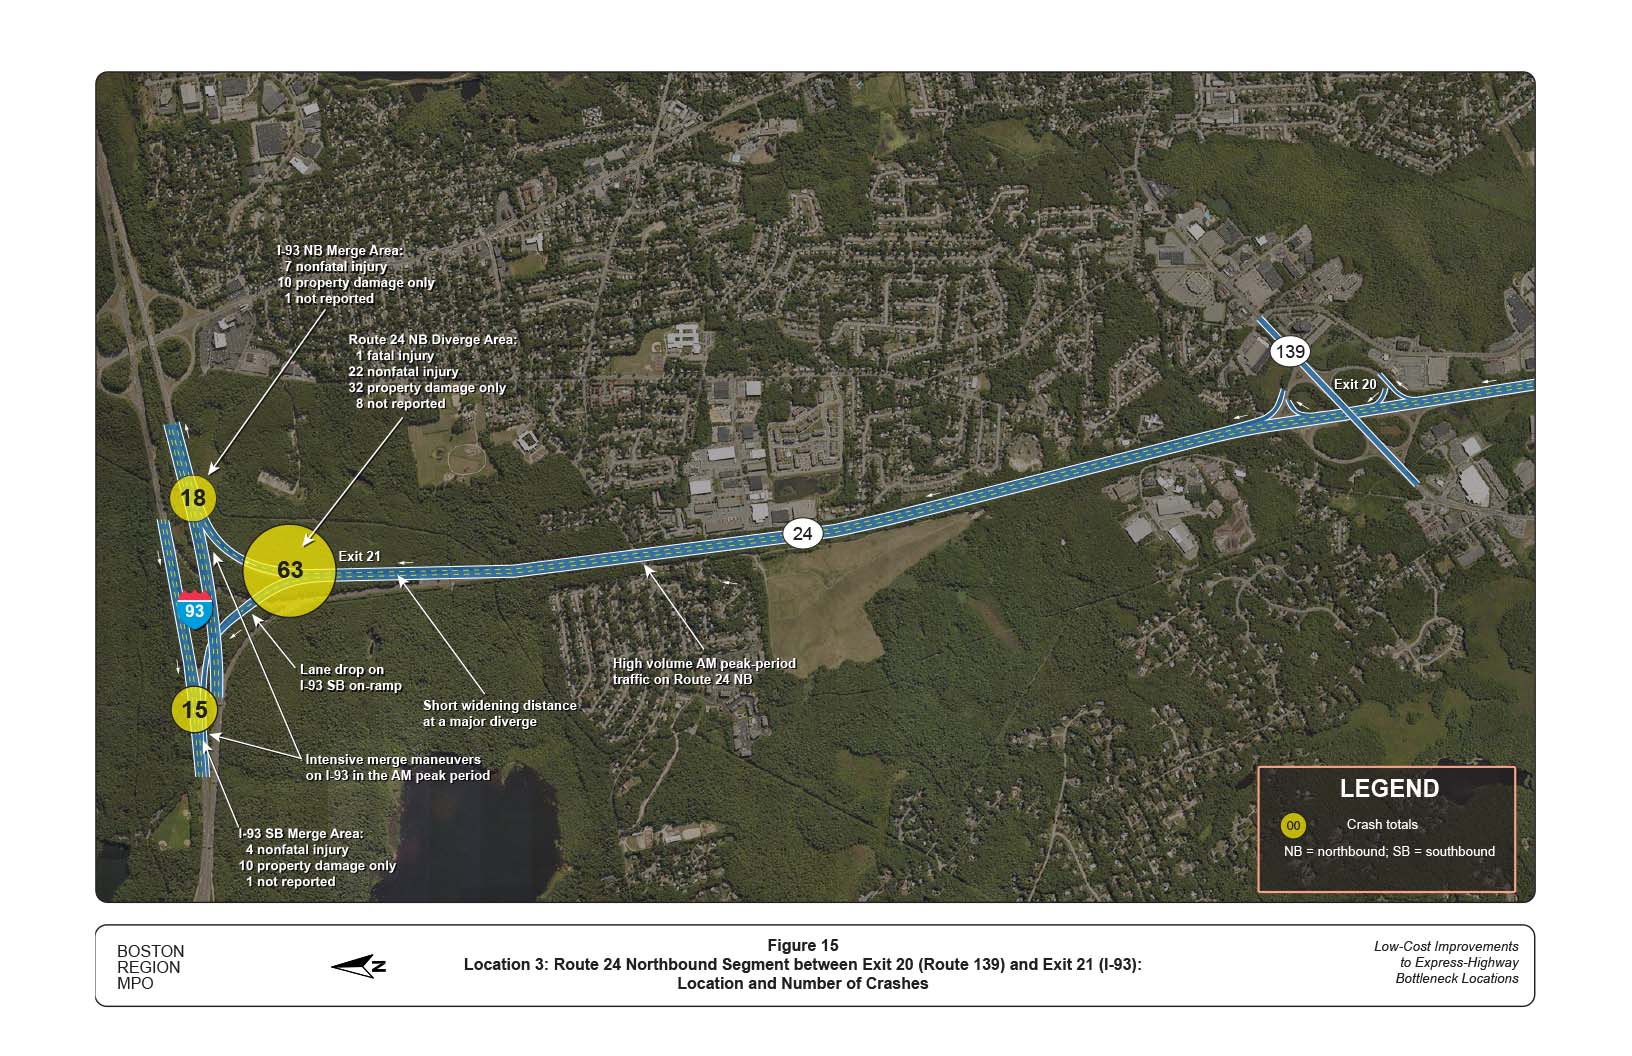 FIGURE 15. Location 3: Route 24 Northbound Segment between Exit 20 (Route 139) and Exit 21 (I-93): Location and Number of Crashes
Figure 15 shows the location of crashes that occurred on Routh 24 Northbound between Exit 20 and Exit 21 between 2010 and 2014. There were 96 crashes in this segment; the majority of which (63) occurred leading up to the diverge at the I-93 interchange.
